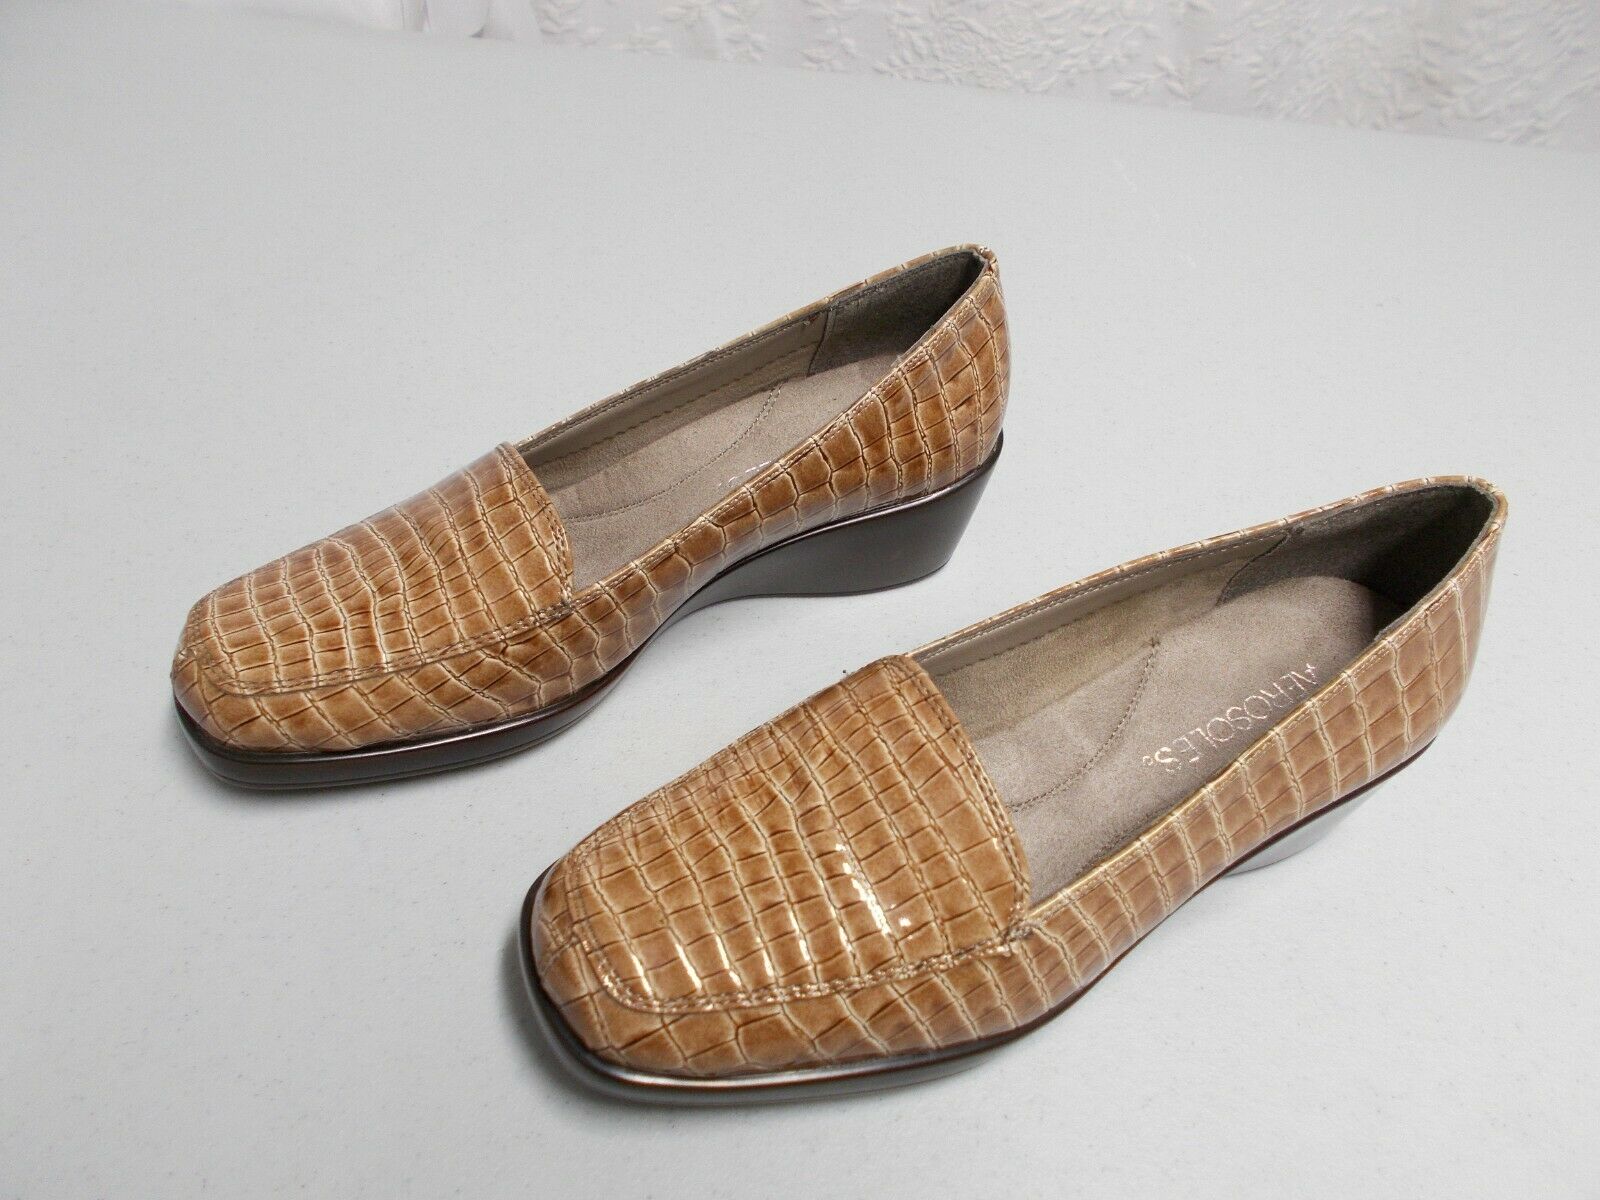 AEROSOLES Final Exam Women's Taupe Croc Print Loafers Wedge Shoes Size 5 M